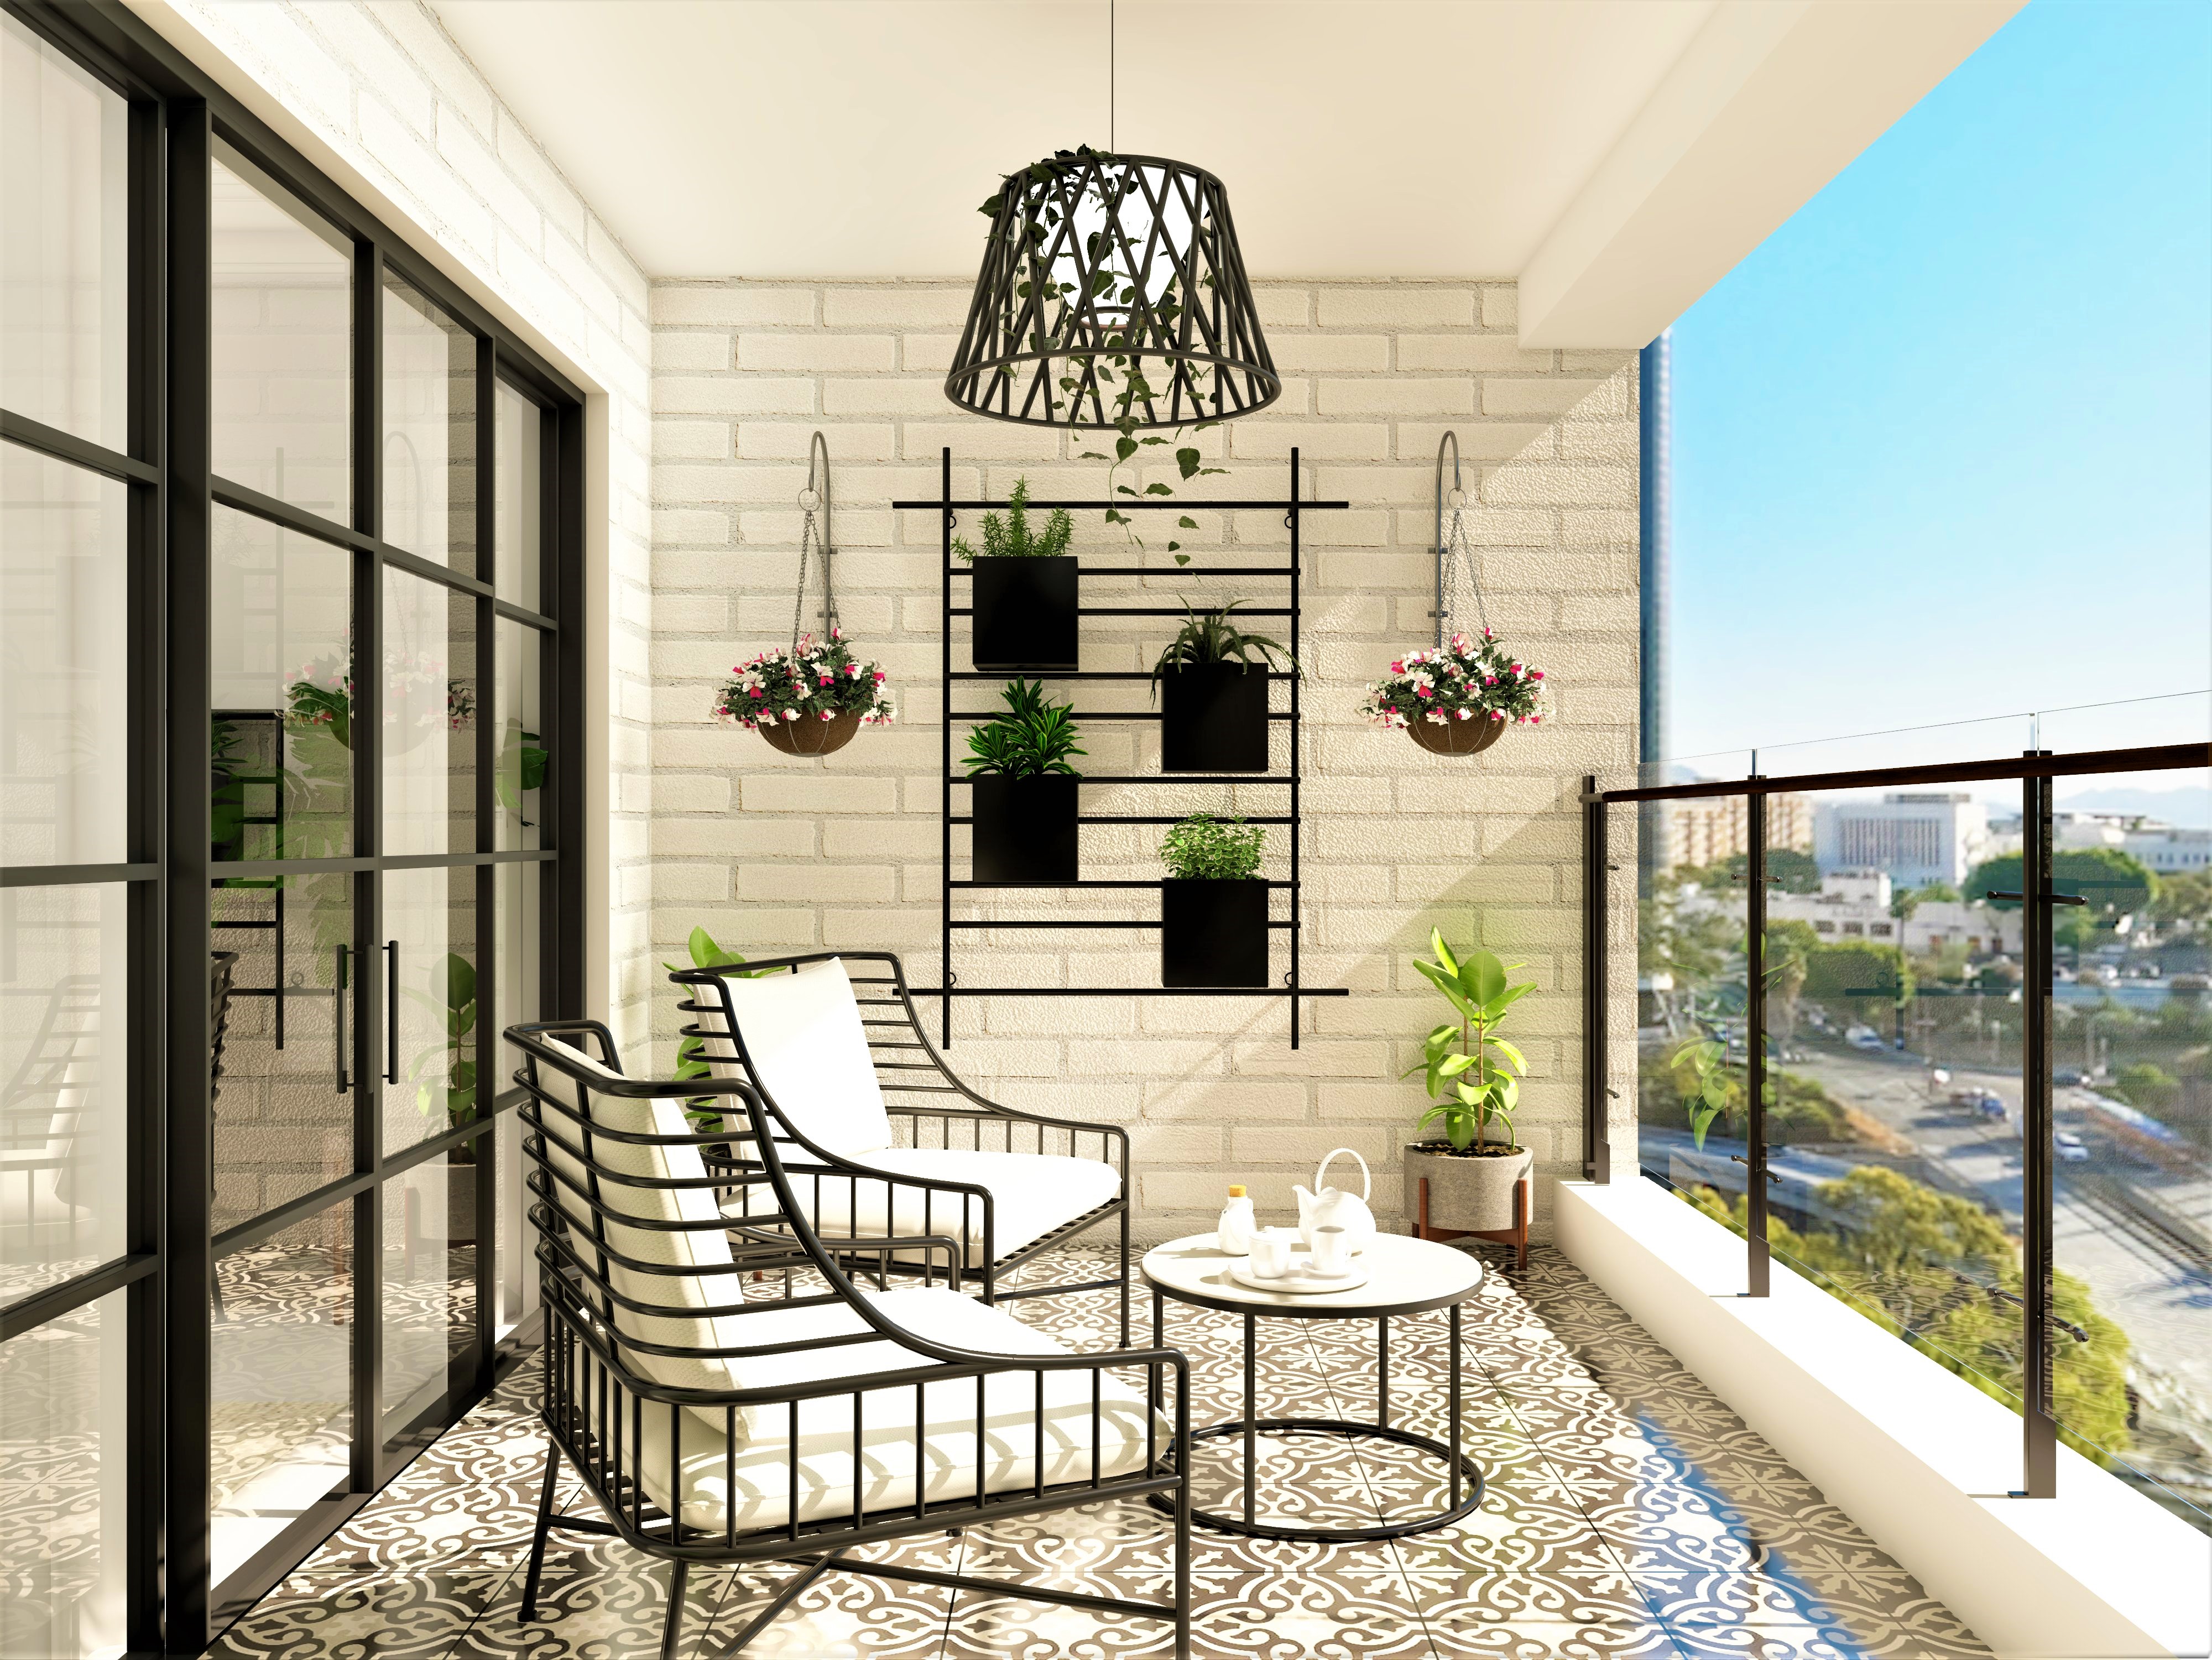 Modern balcony design with iron grill shelves